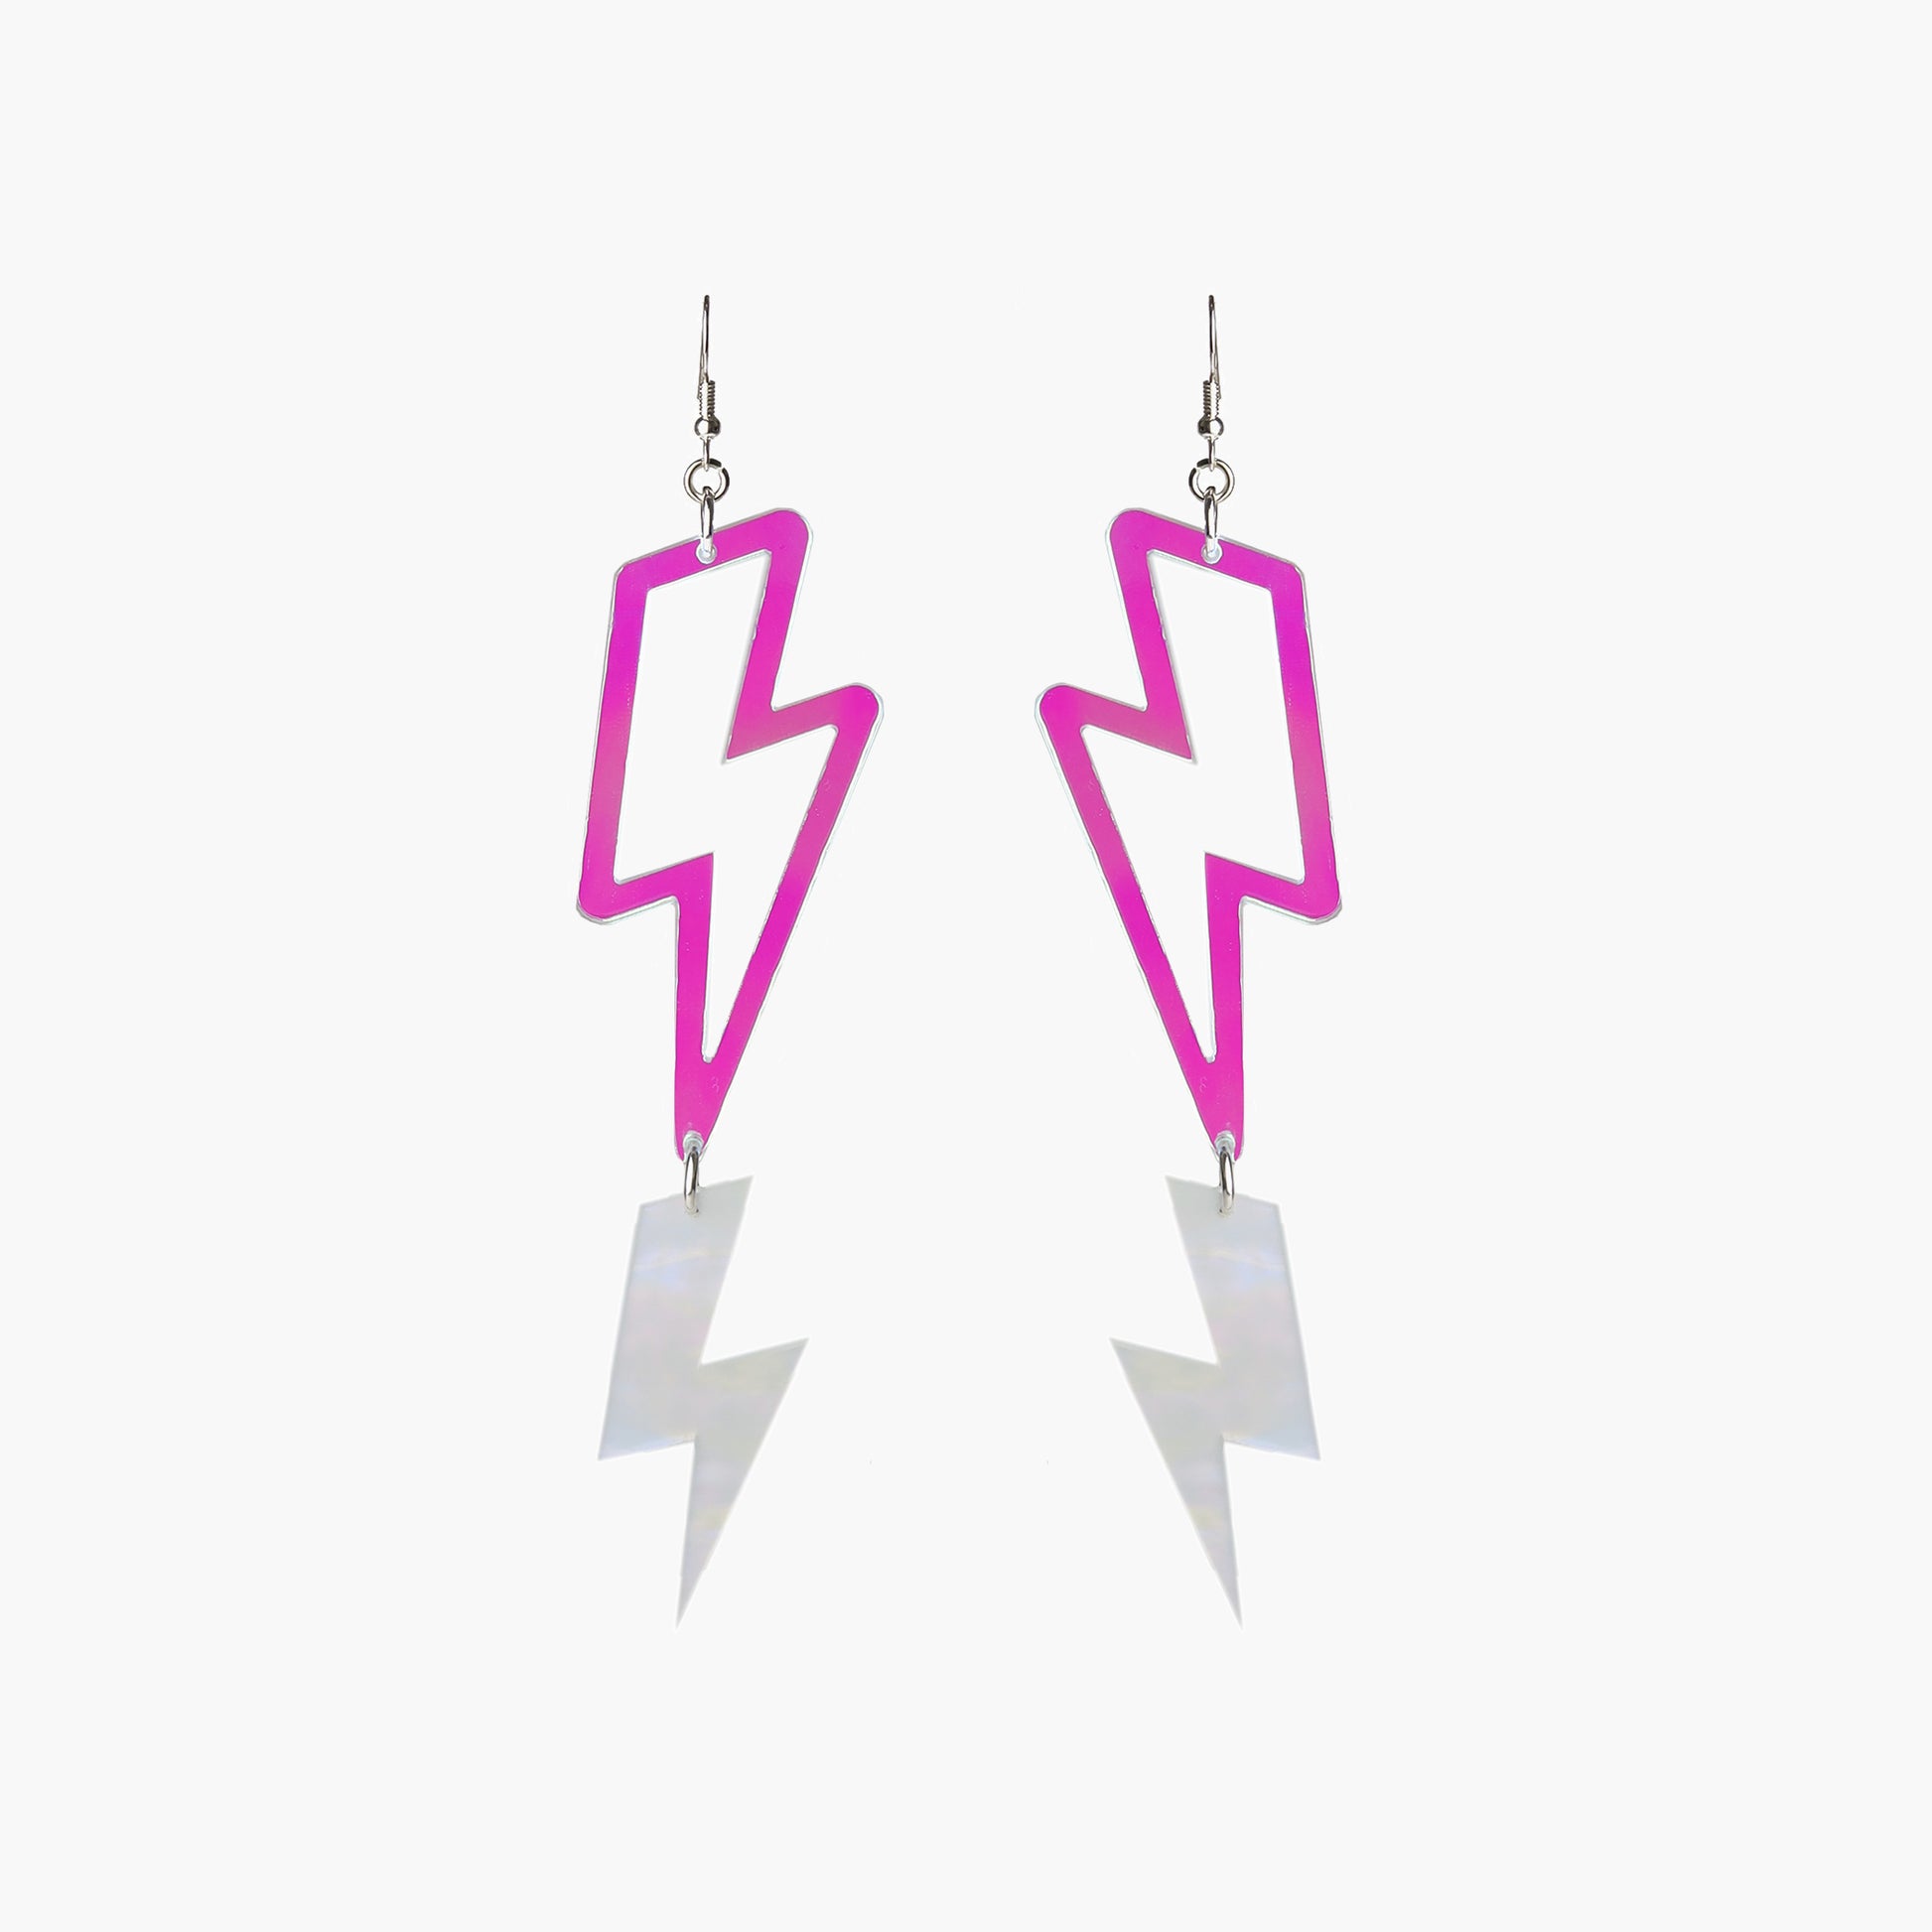 Front view image of Indi City Double Stacked Lightning Earrings in cloudy iridescent and transparent iridescent acrylic. 